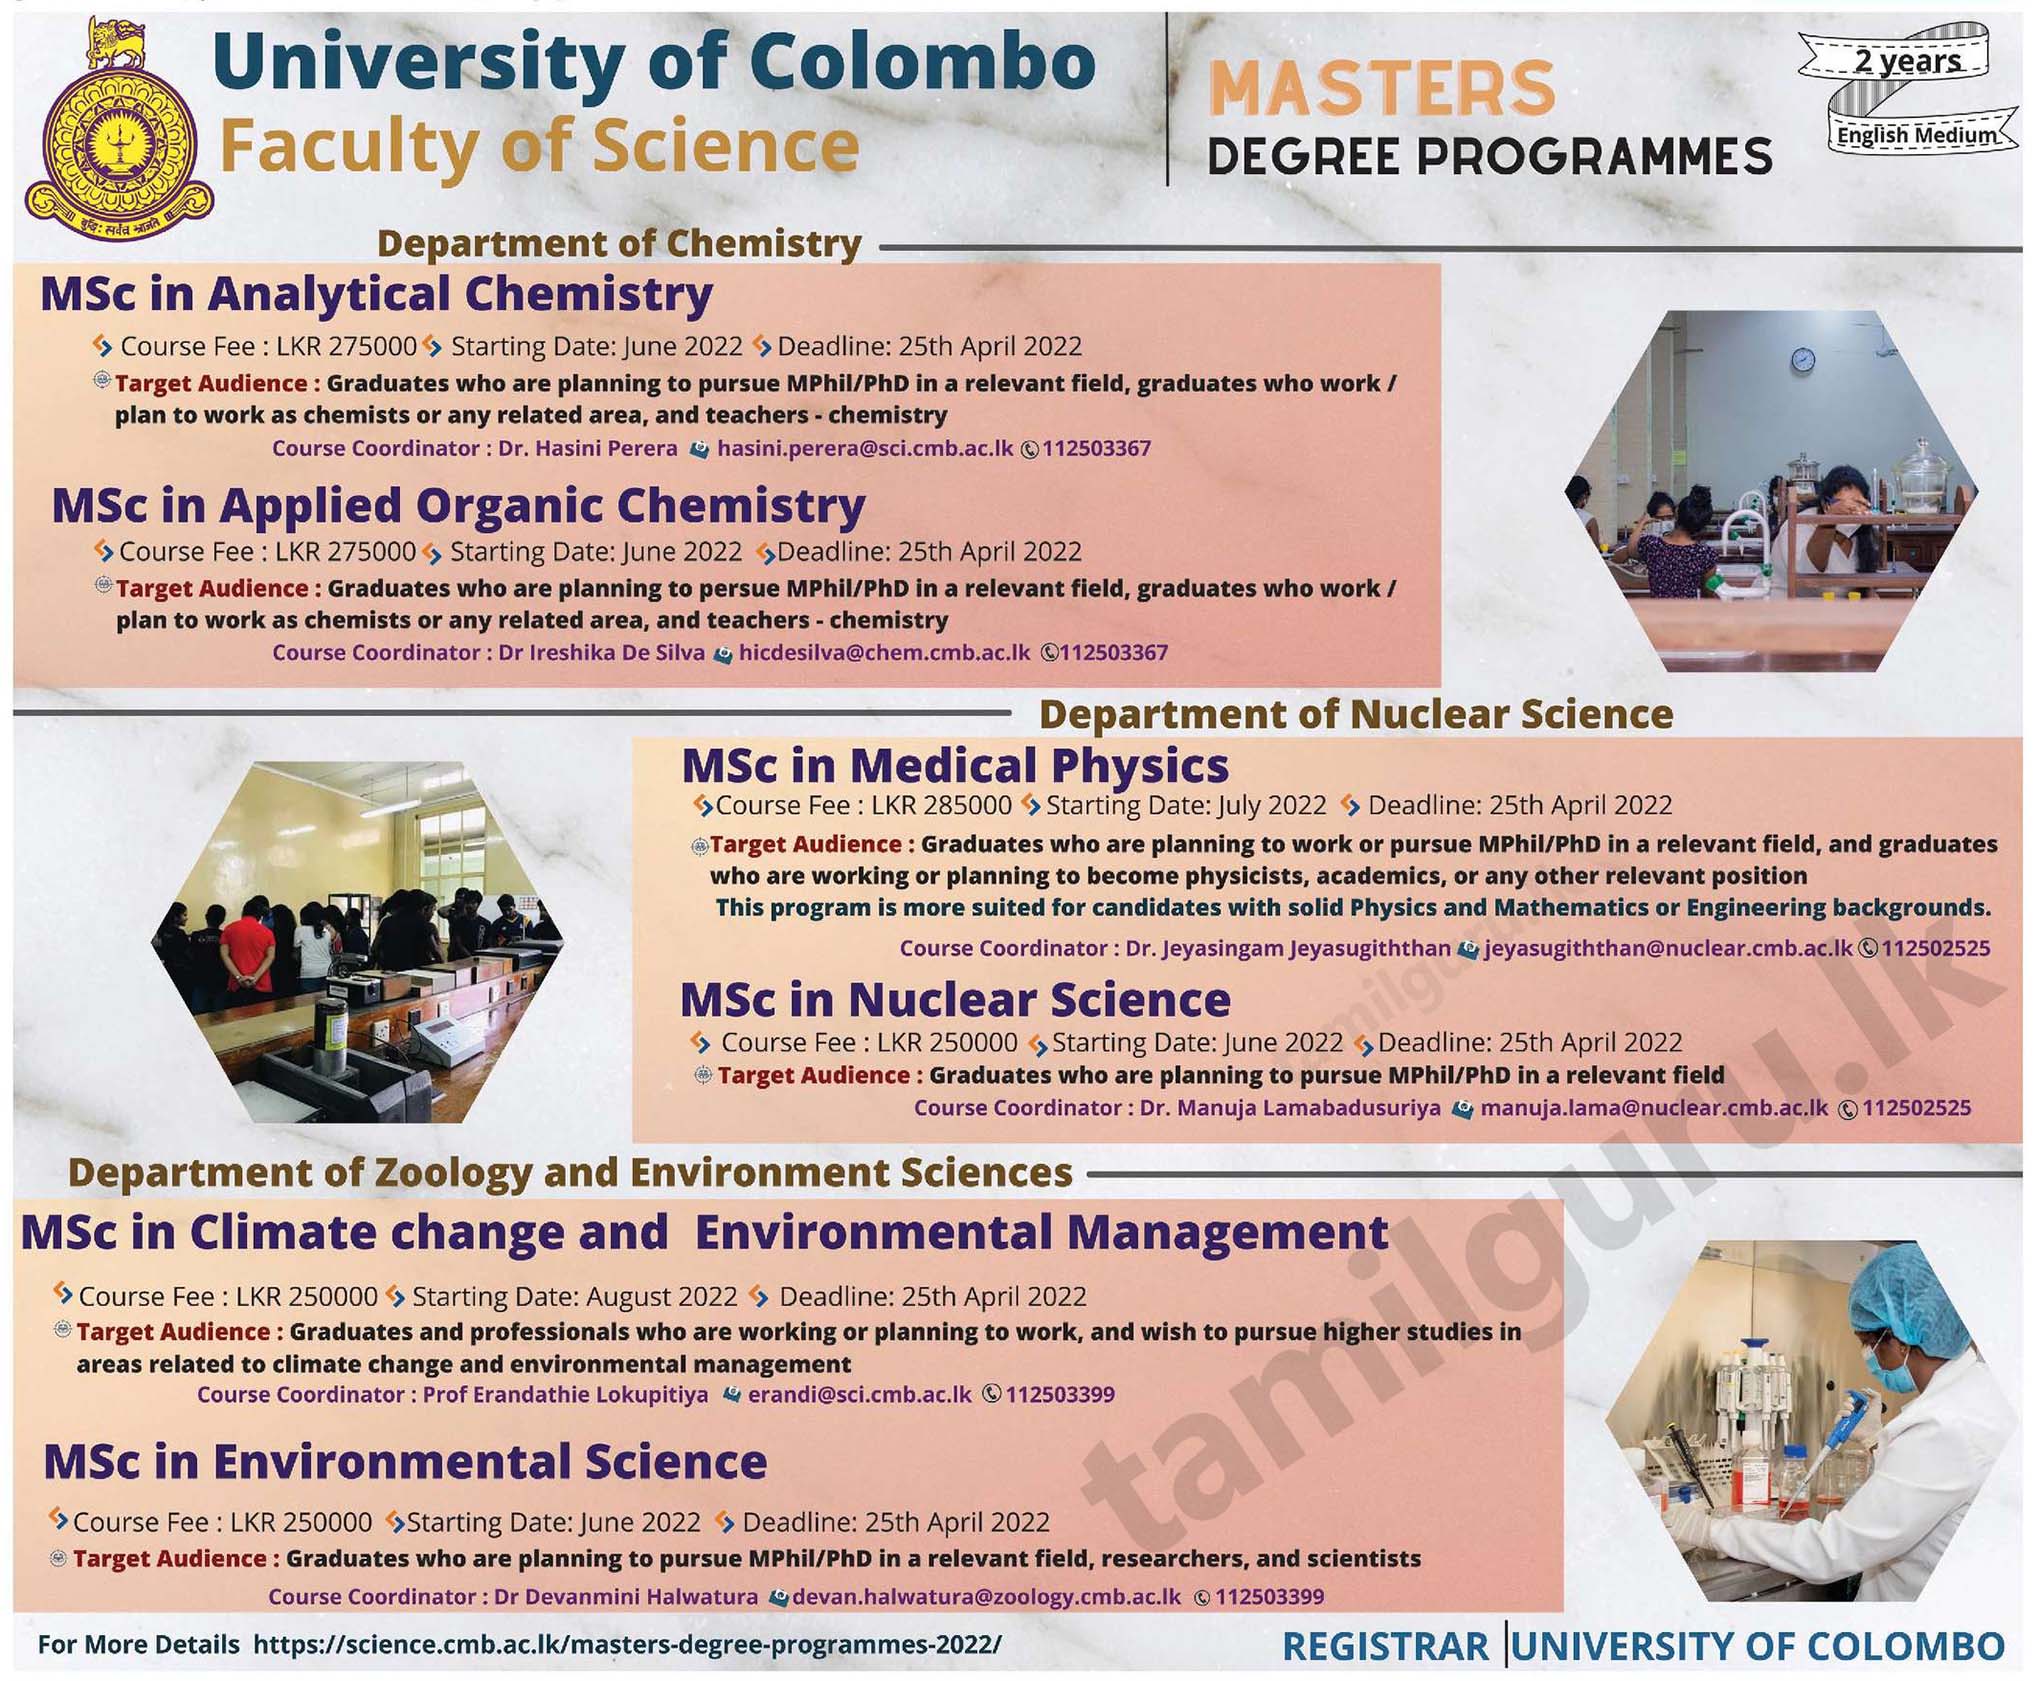 Master of Science (M.Sc) Degree Programmes (2022 Intake) - Faculty of Science, University of Colombo